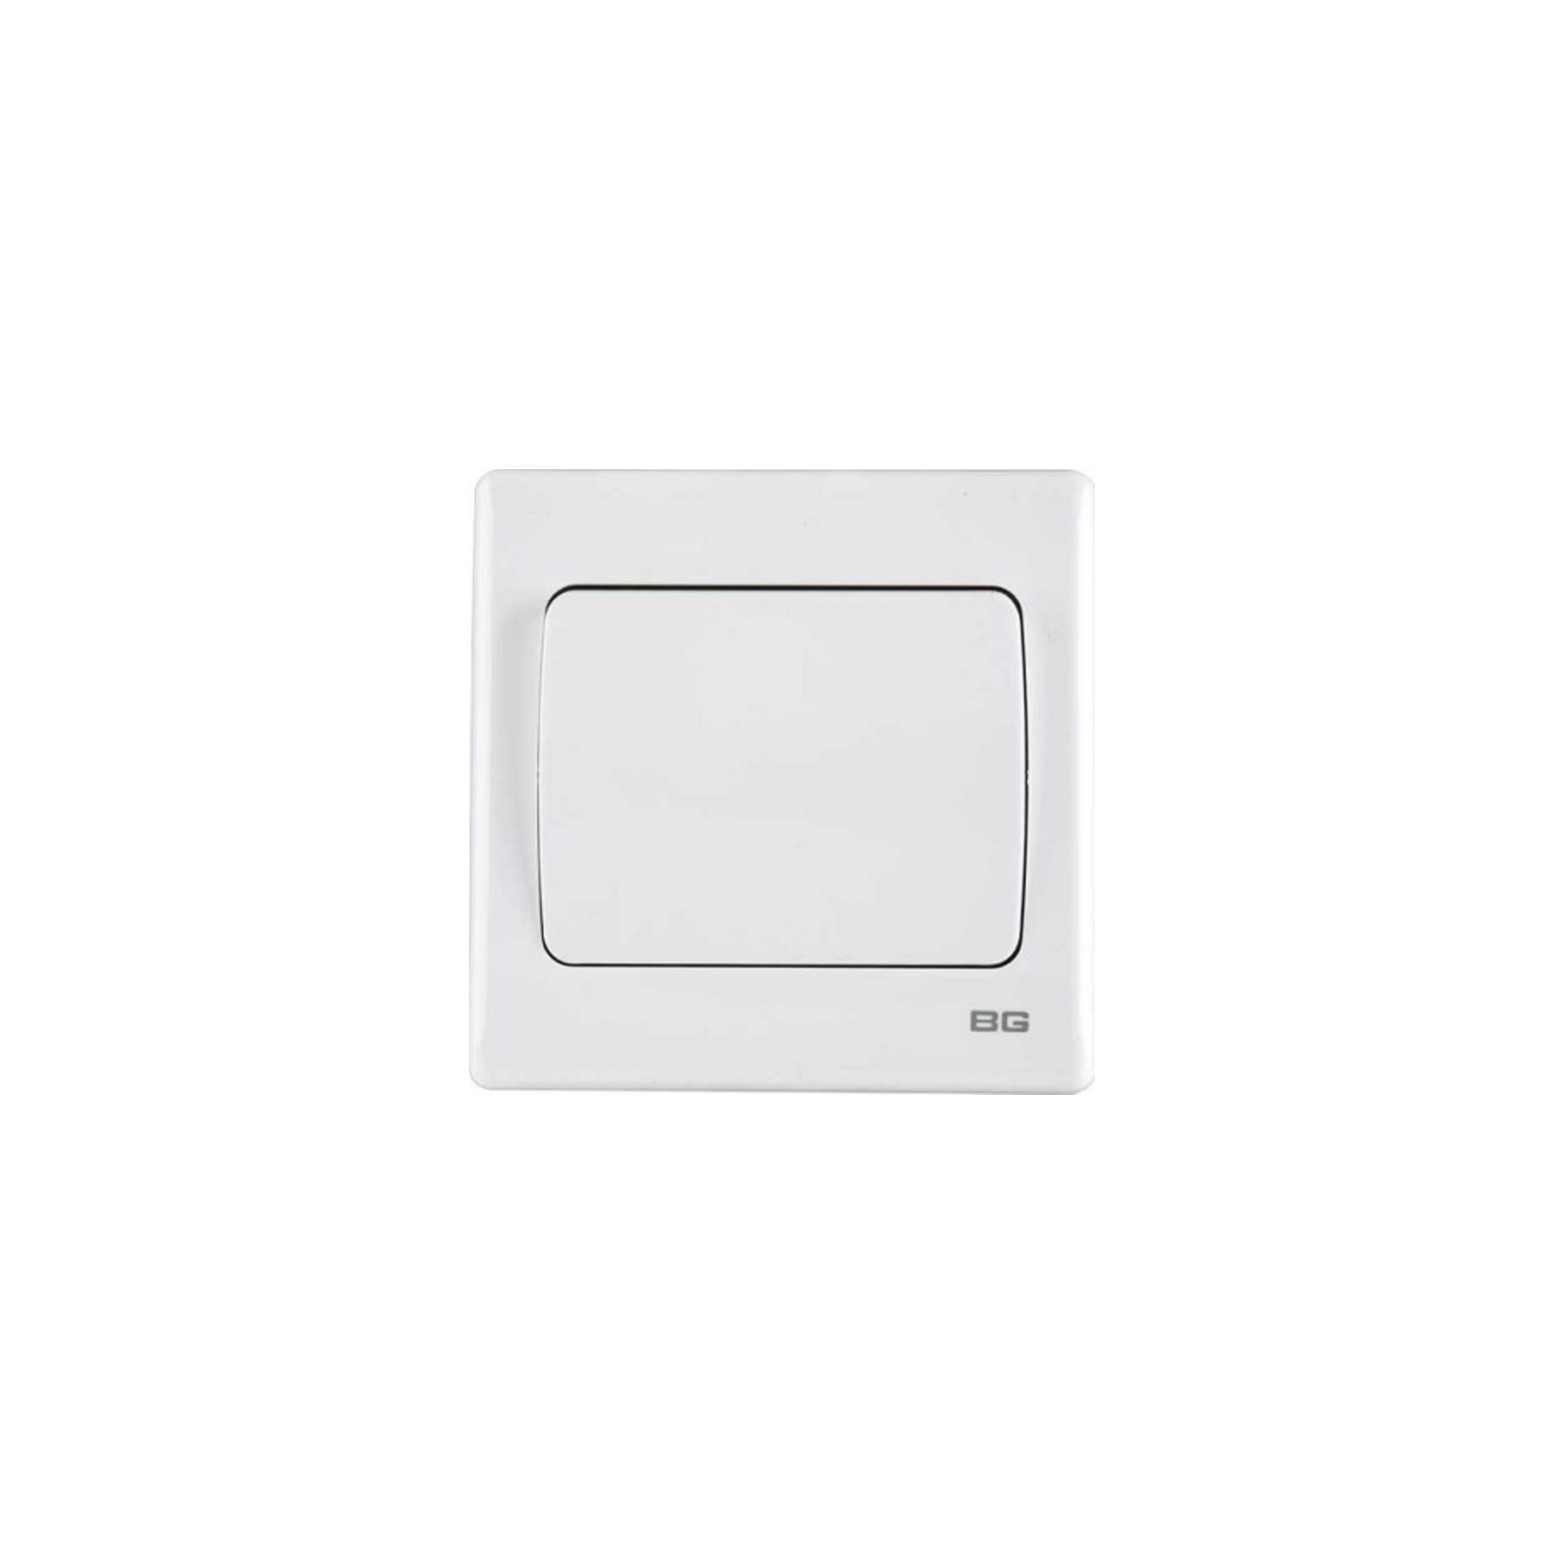 White SlimLine 1-Gang 2Way 10AX Switch, single screwless clip-on front plate curved corners(PCWH12W)